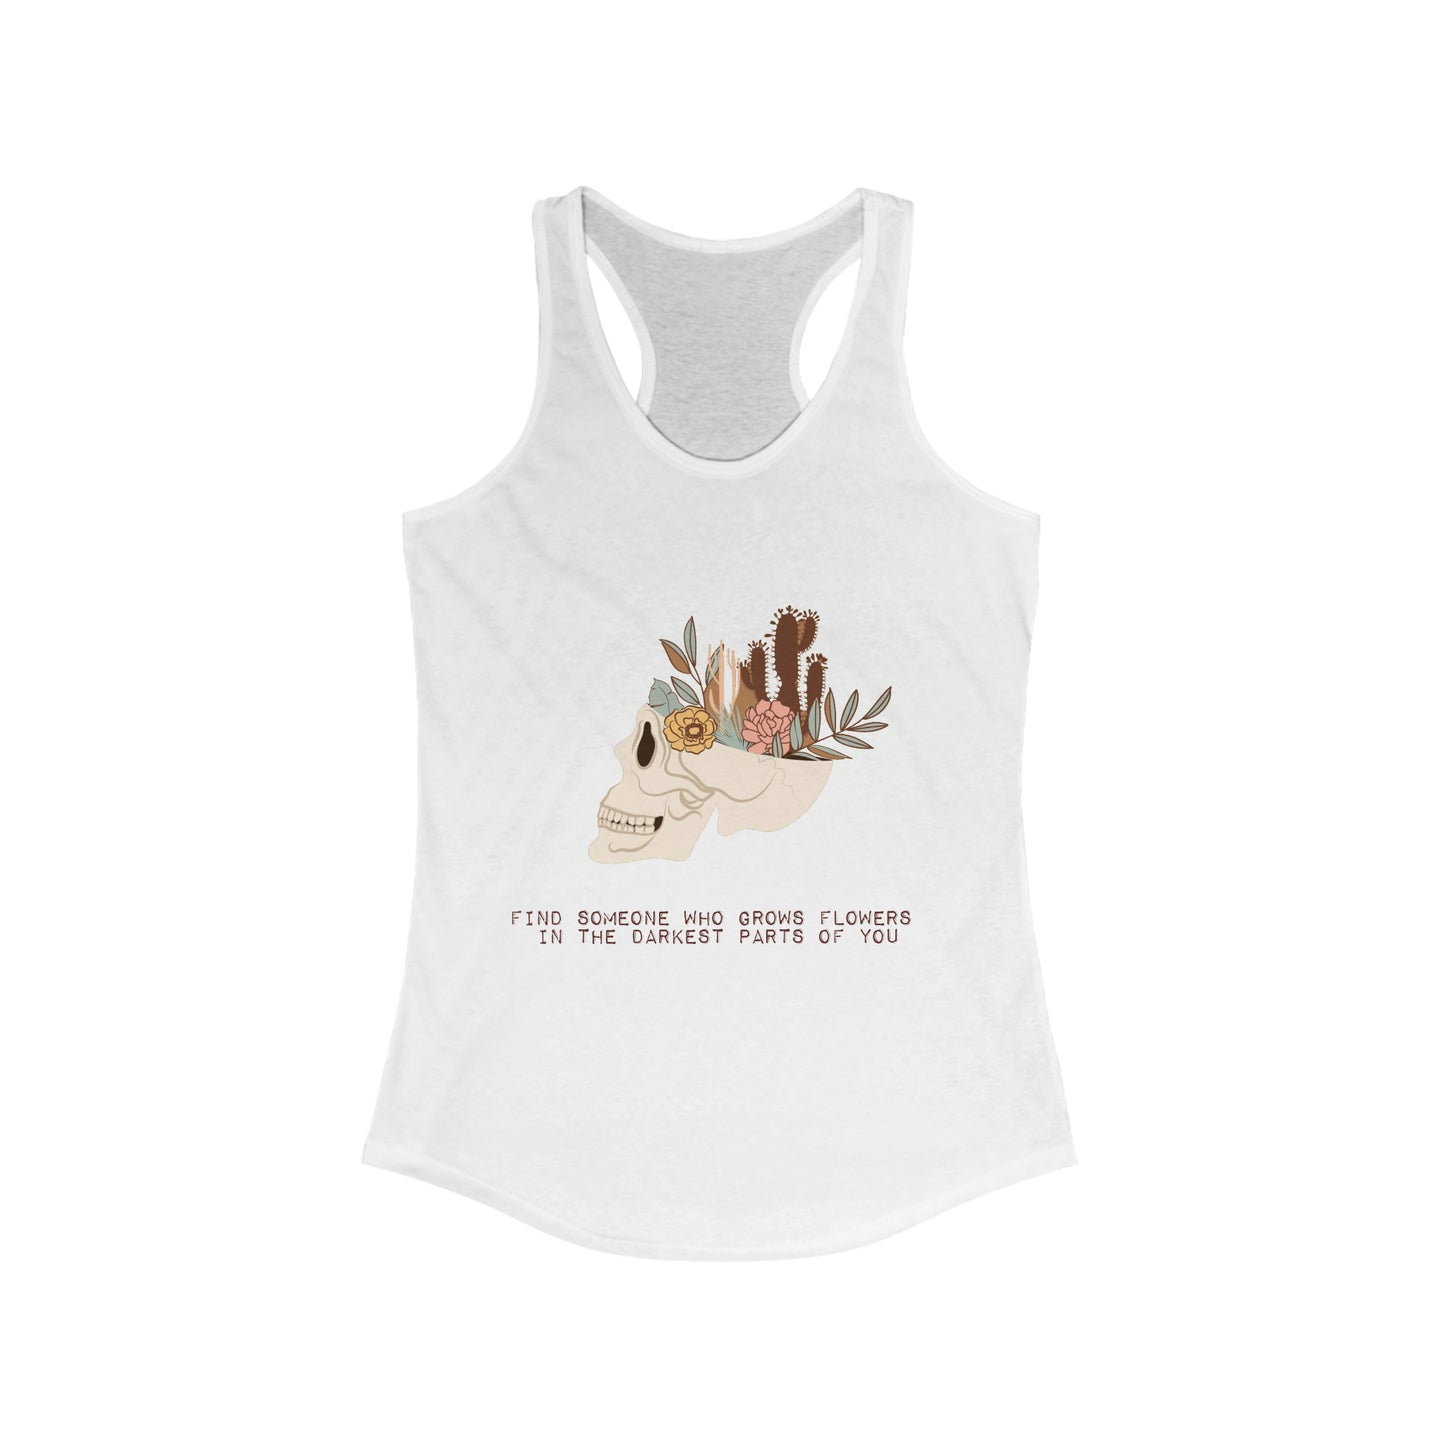 Zach Bryan Sun to Me Racerback Tank, Find Someone who grows flowers in the Darkest parts of You, Zach Bryan Gift Idea